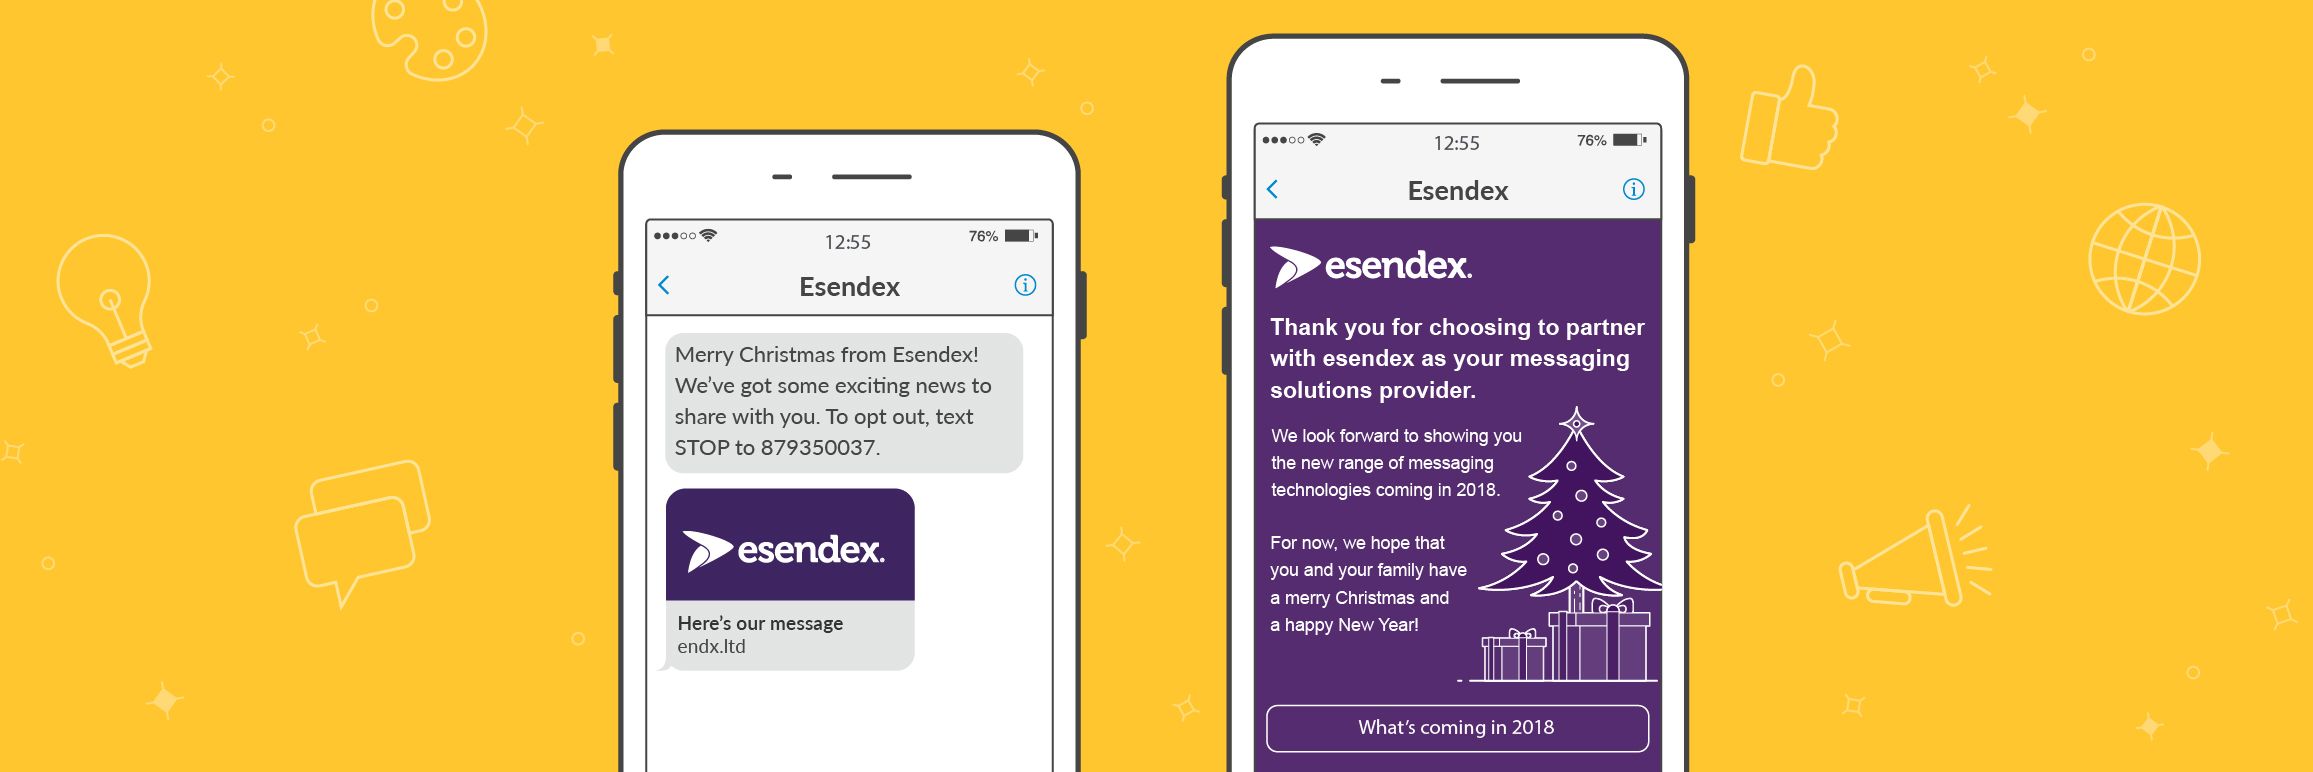 SMS Landing Page Christmas campaign for Esendex